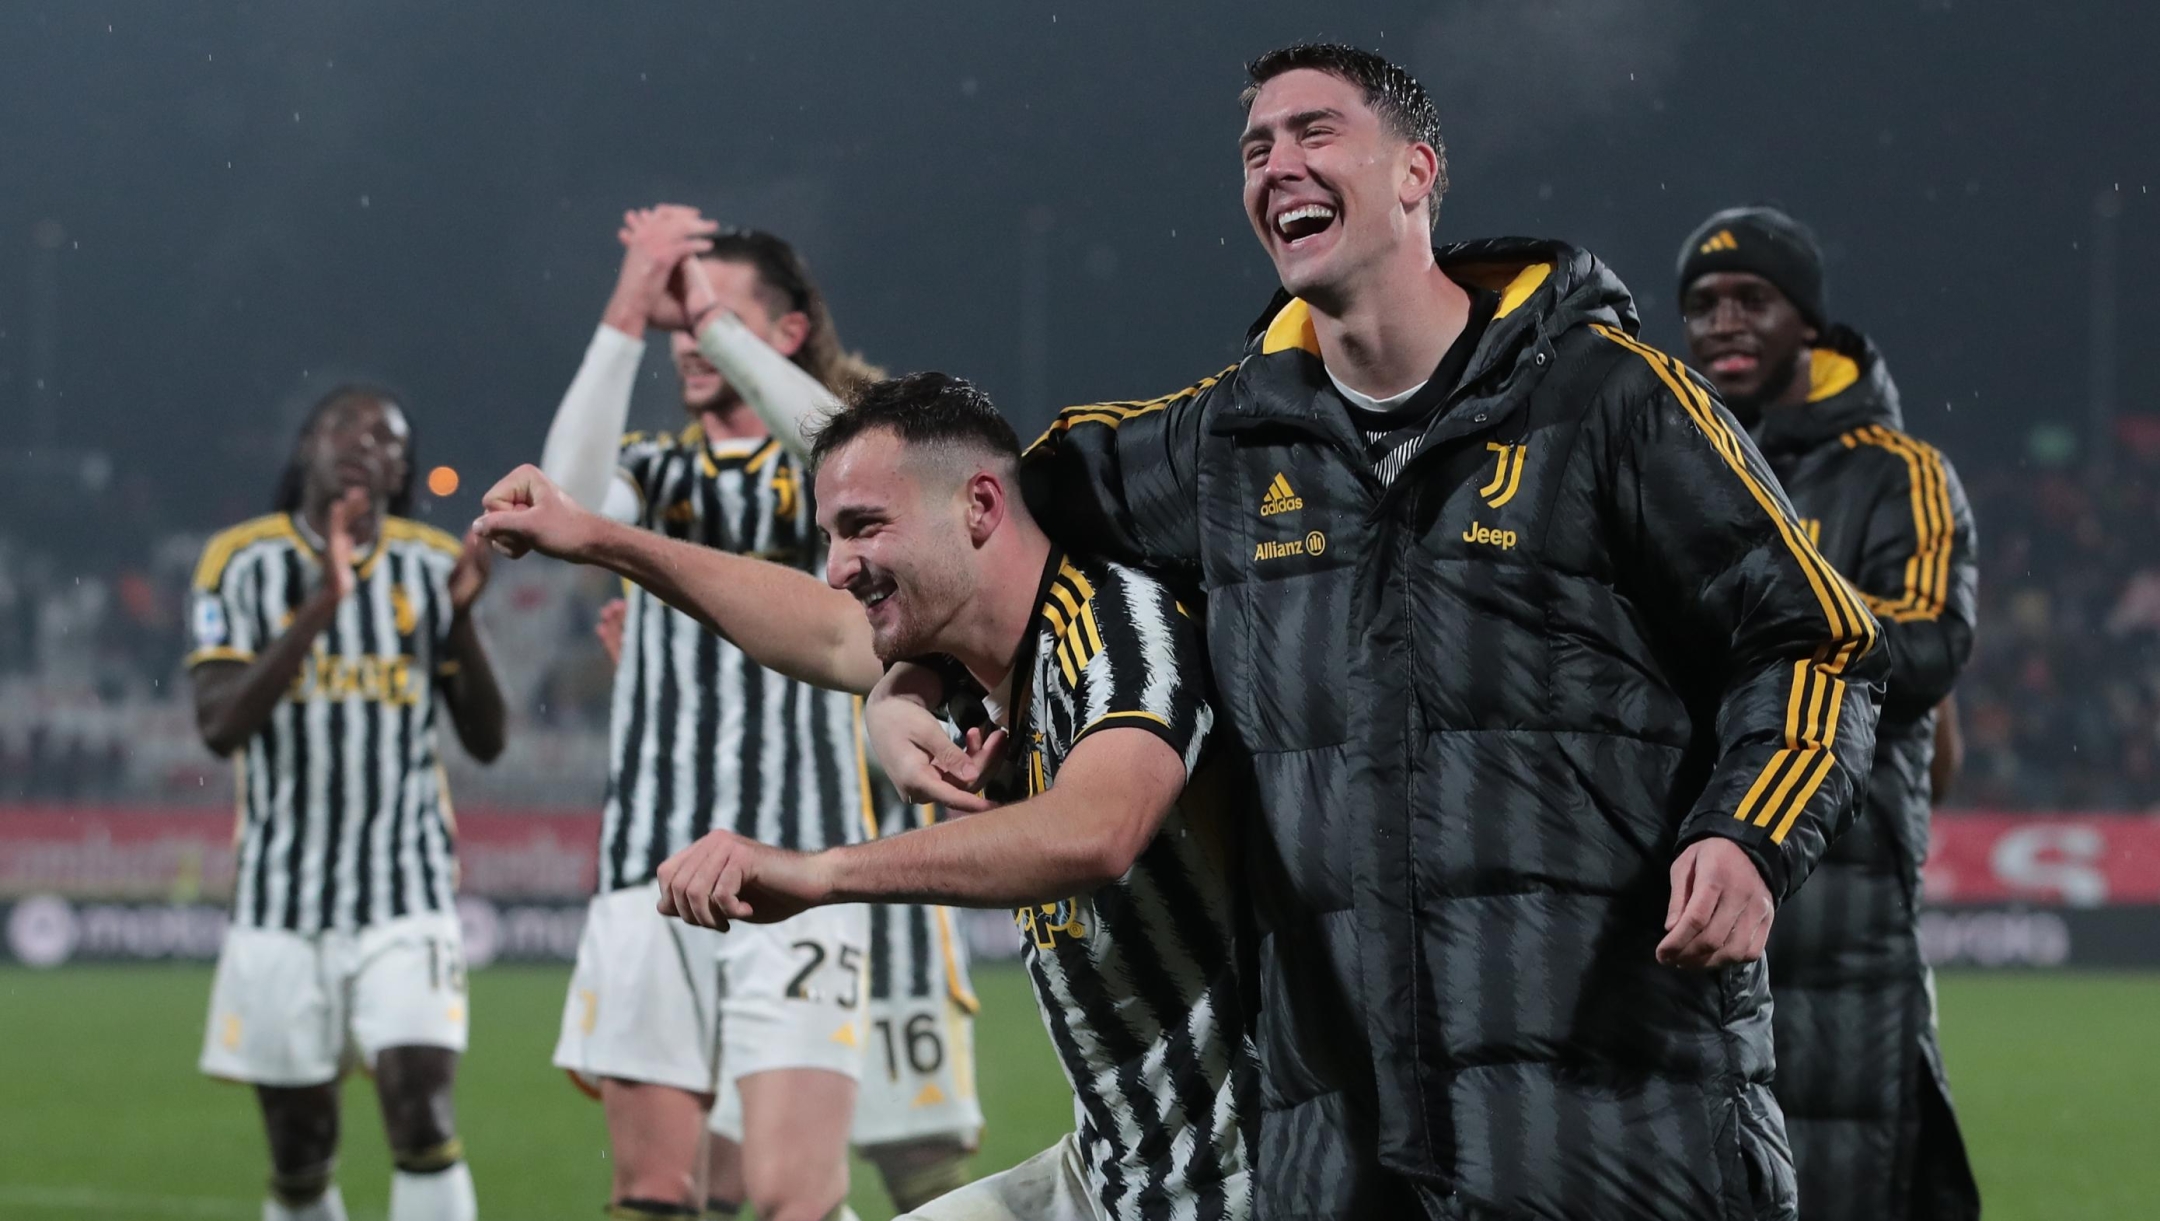 MONZA, ITALY - DECEMBER 01: Federico Gatti of Juventus (L) celebrates a victory with his teammate Dusan Vlahovic following the Serie A TIM match between AC Monza and Juventus at U-Power Stadium on December 01, 2023 in Monza, Italy. (Photo by Emilio Andreoli/Getty Images)